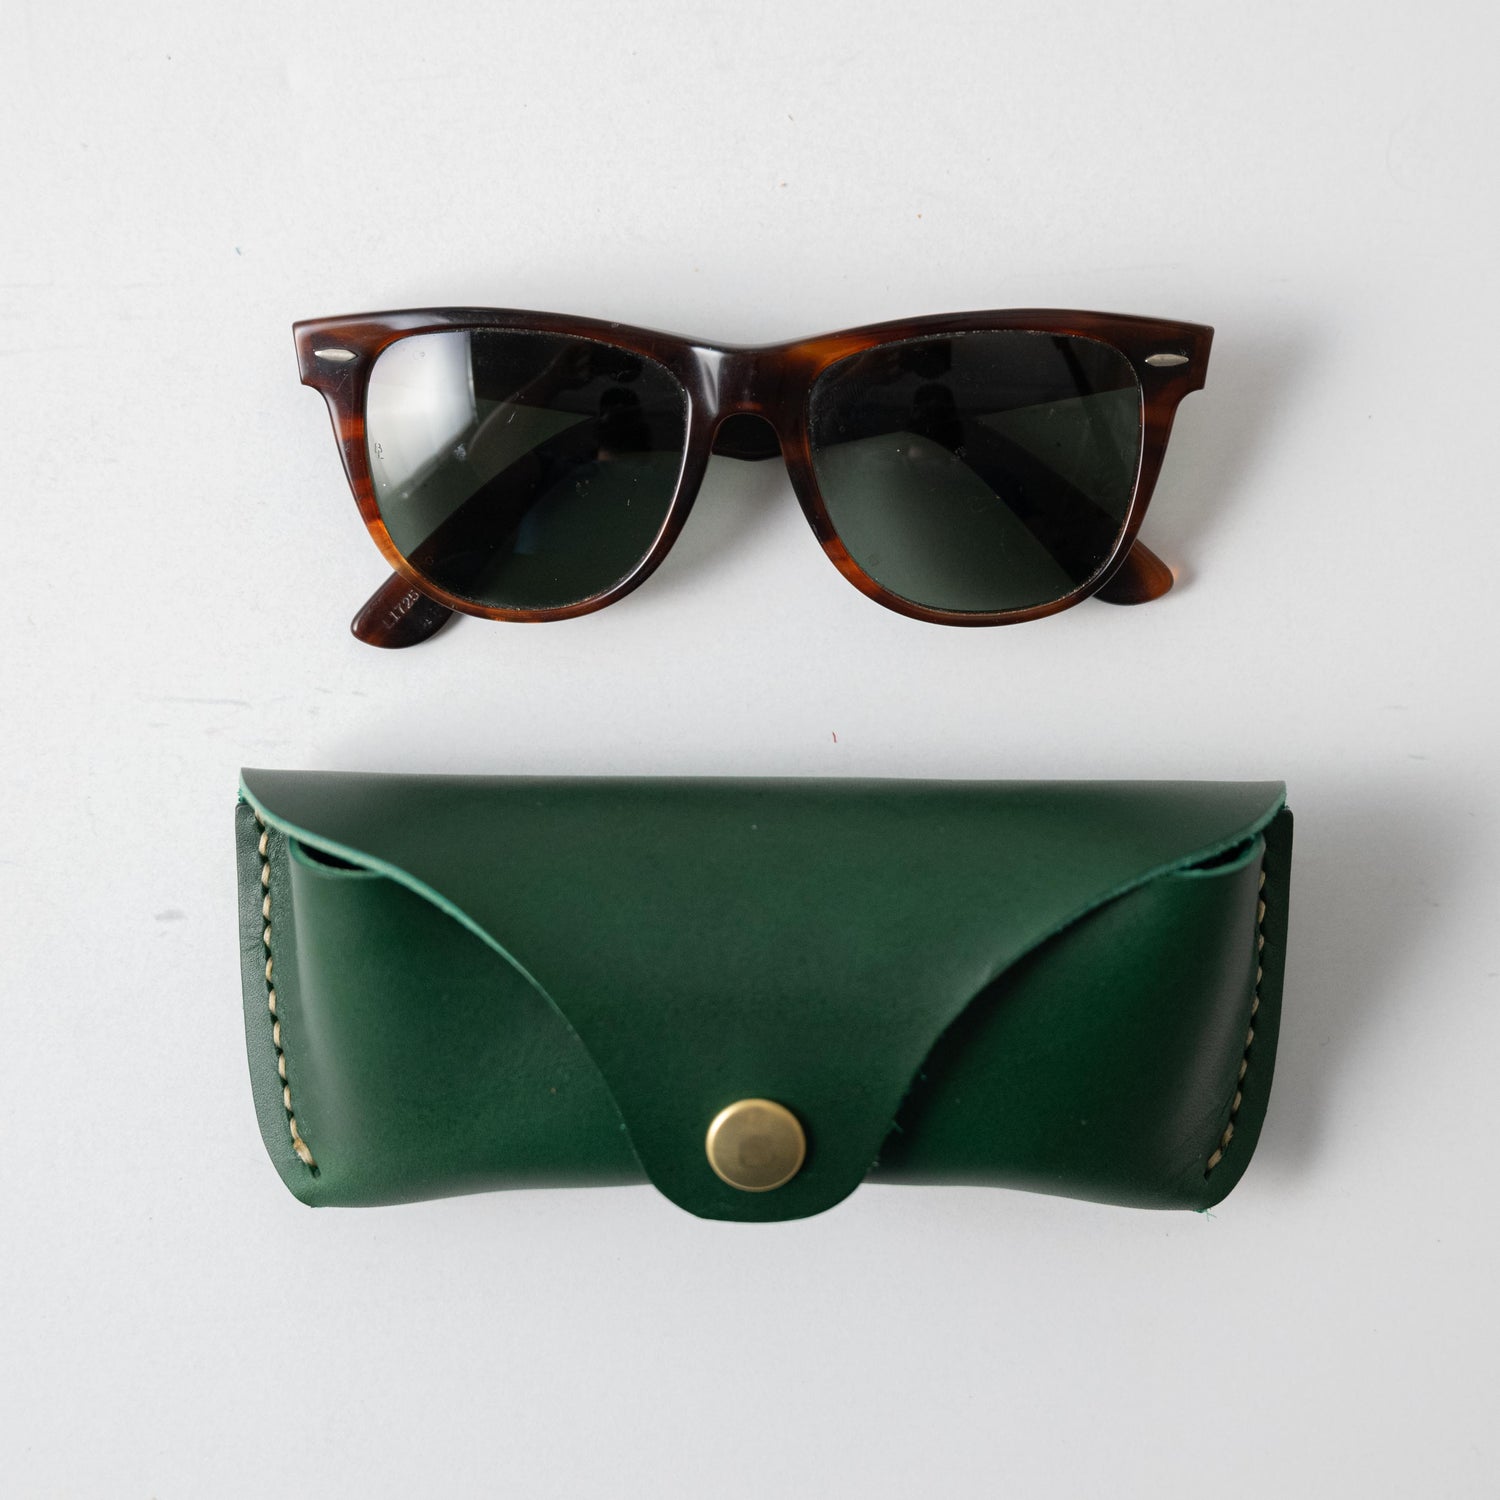 Green Sunglasses Case  Leather sunglass case made in USA by KMM & Co.